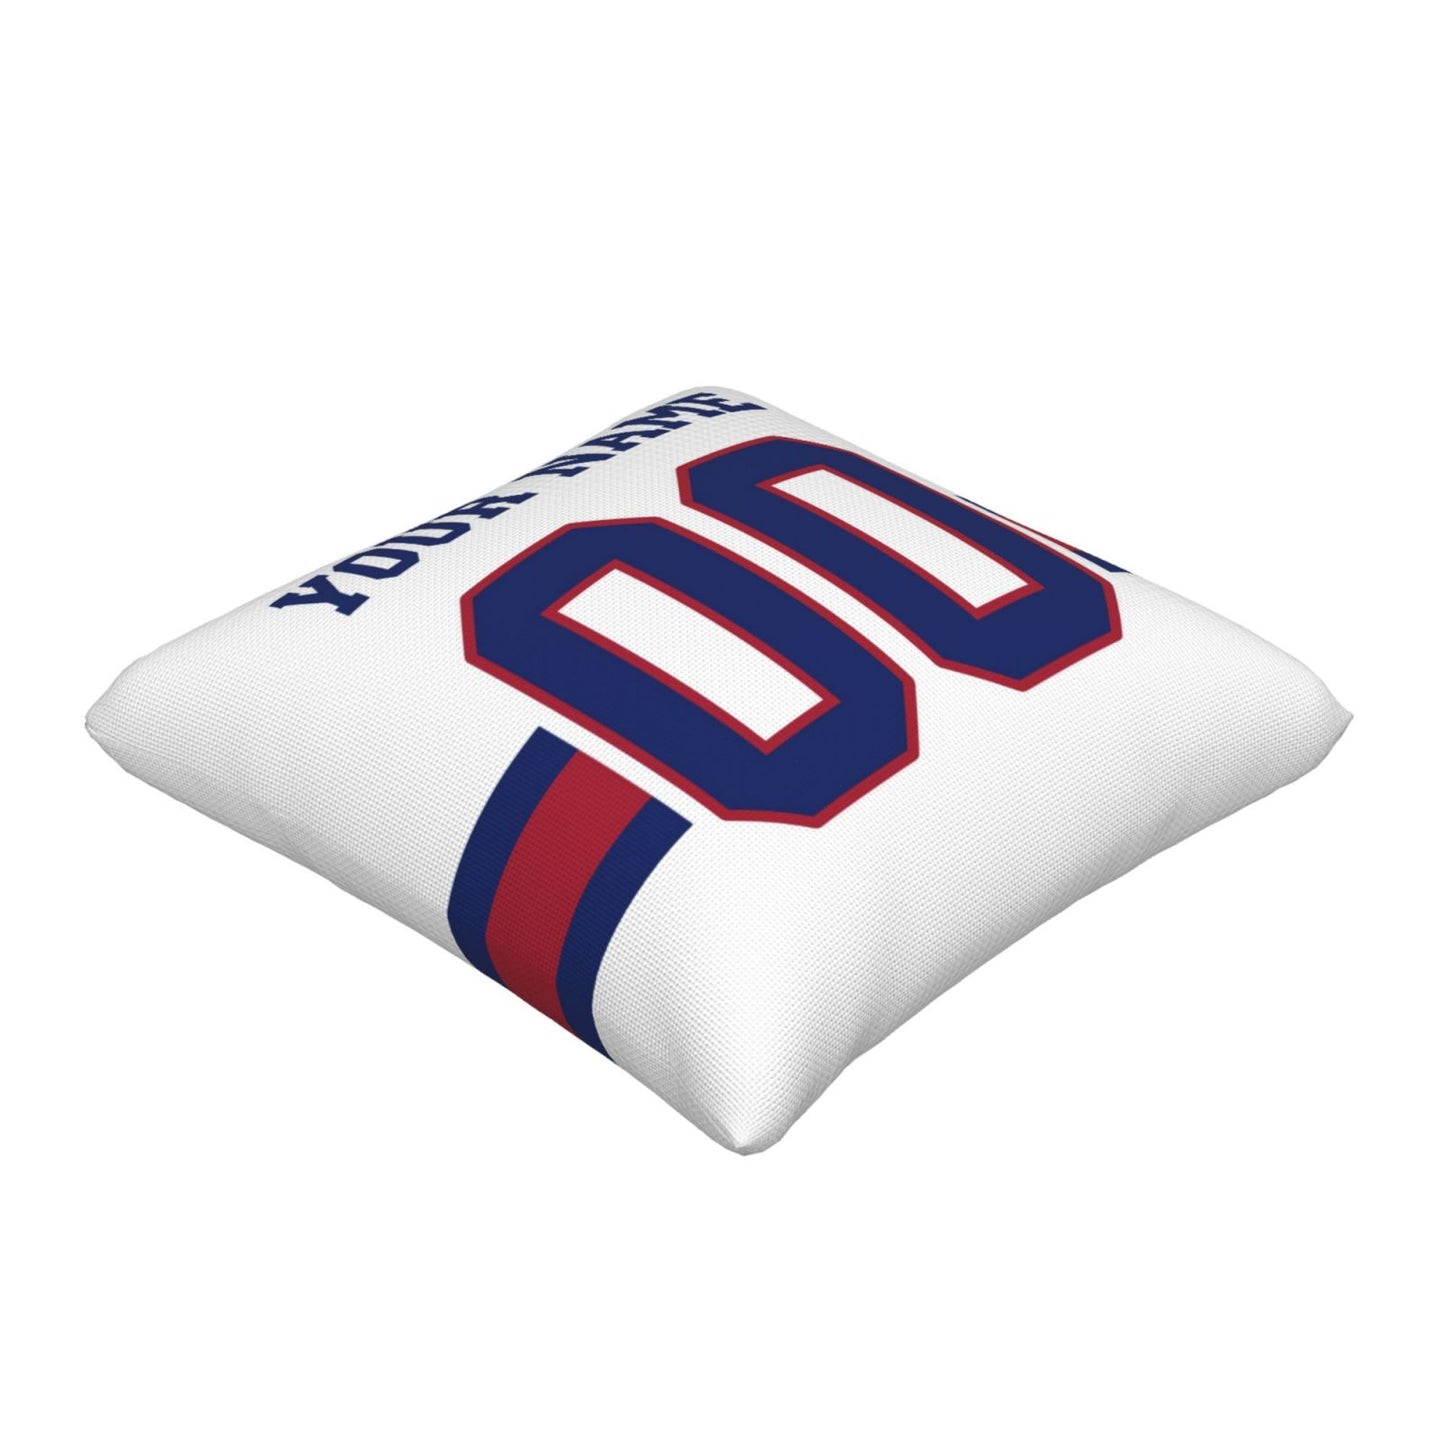 Custom White New York Giants Decorative Throw Pillow Case - Print Personalized Football Team Fans Name & Number Birthday Gift